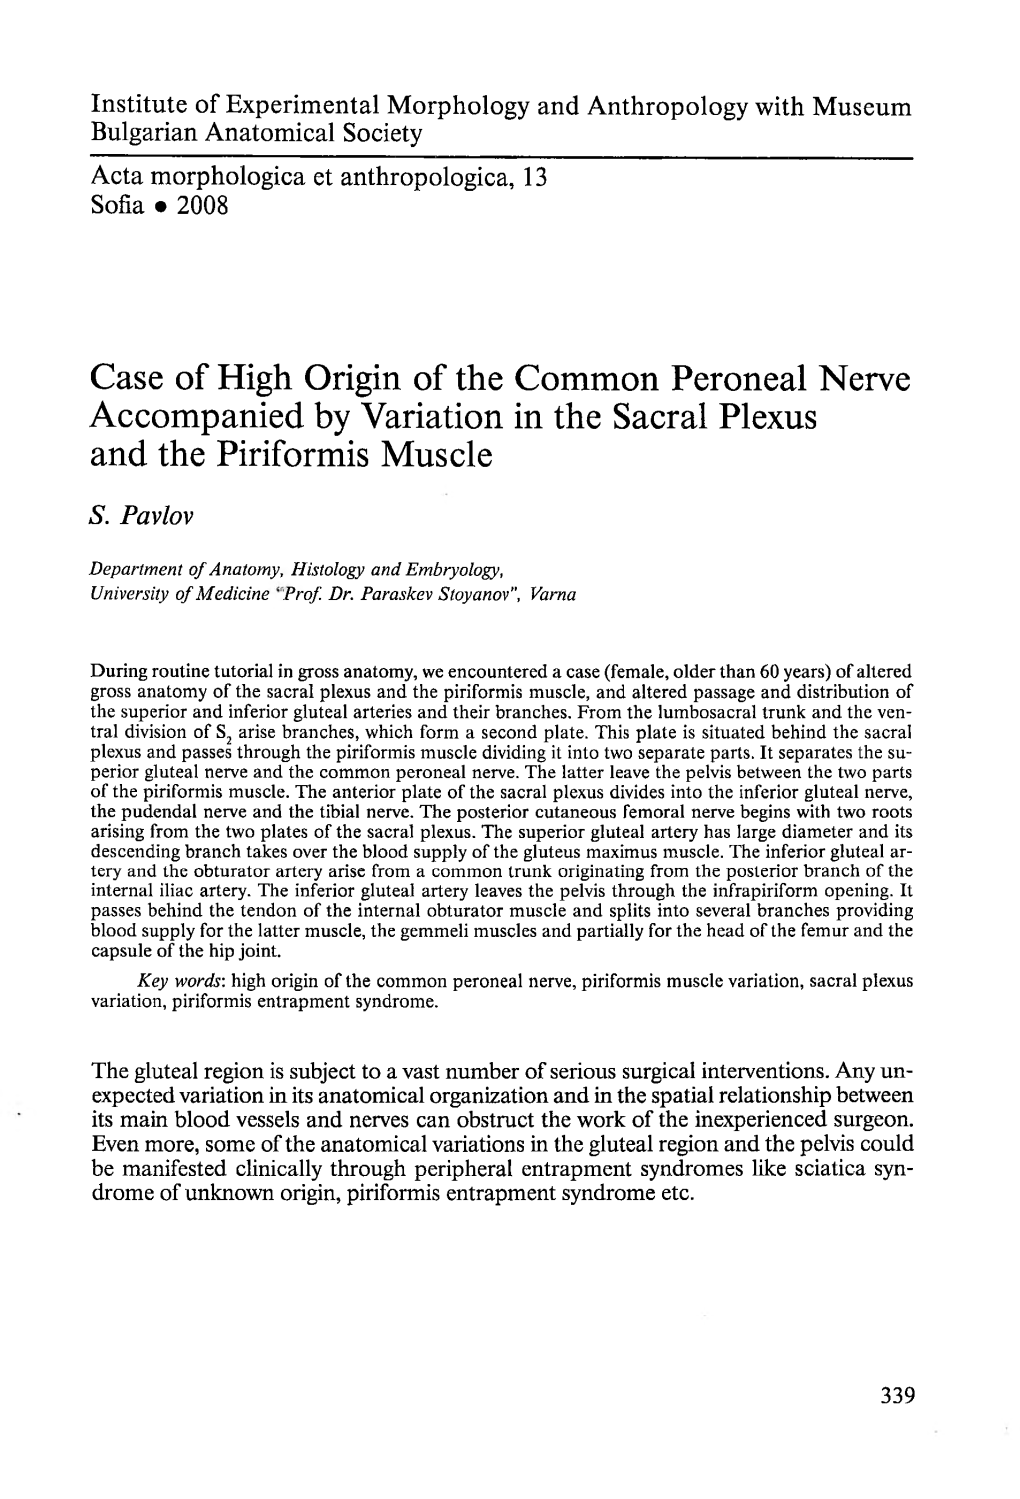 Case of High Origin of the Common Peroneal Nerve Accompanied by Variation in the Sacral Plexus and the Piriformis Muscle